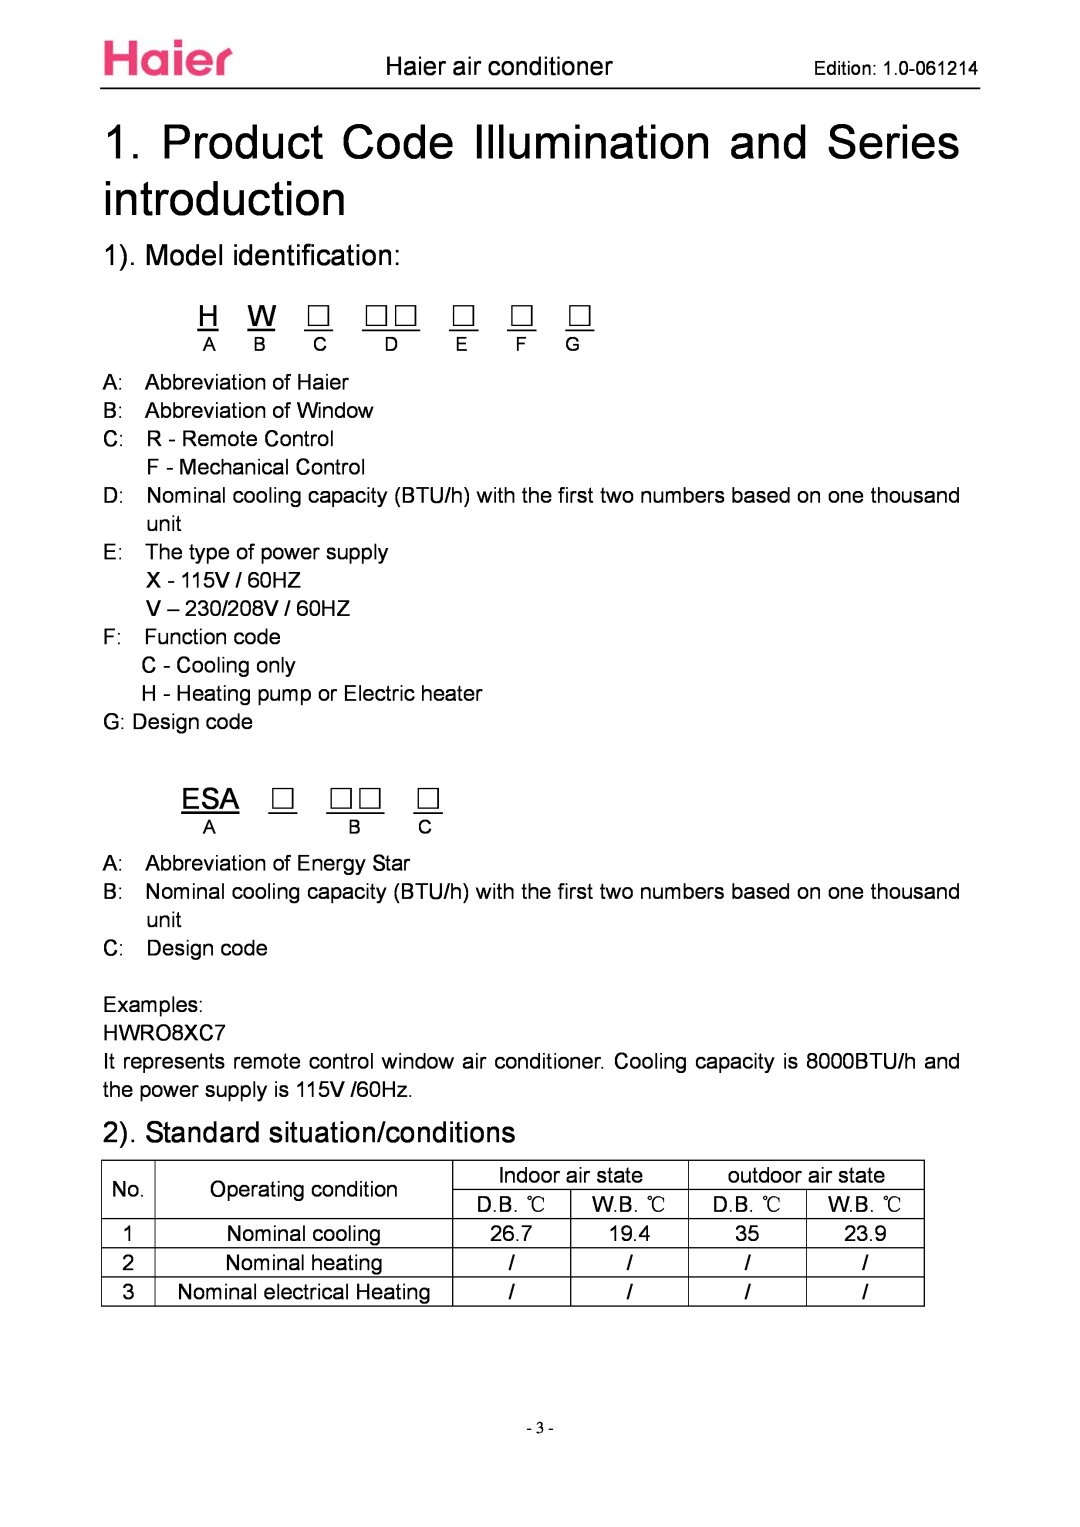 Haier ESA3087 service manual Model identification, Standard situation/conditions, Haier air conditioner 